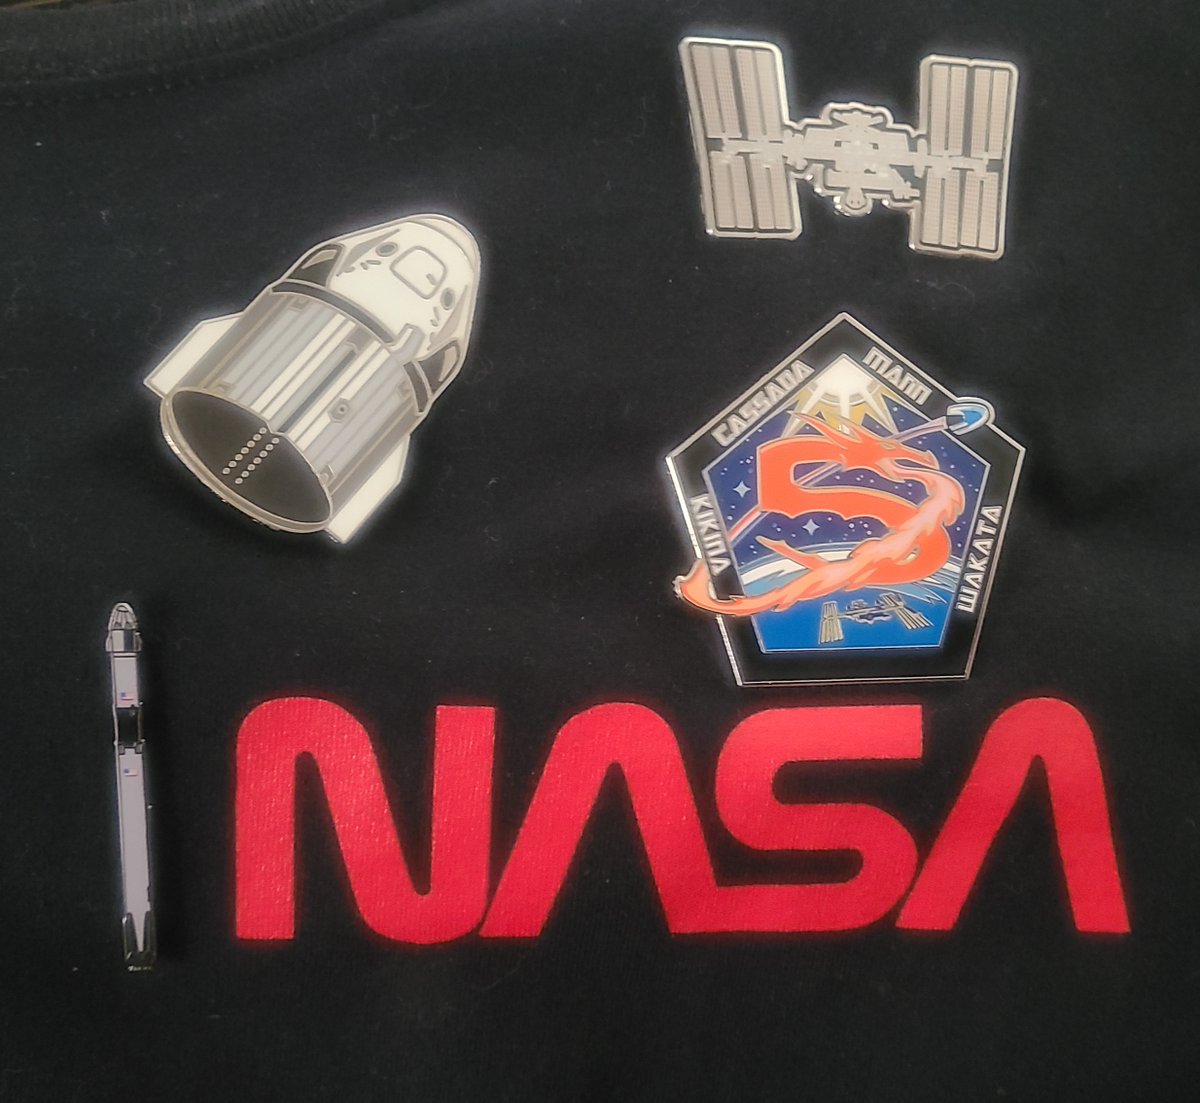 Today's @NASA #Crew5 mission launch attire. 
Have a great flight to @Space_Station aboard @SpaceX #CrewDragon #Endurance @AstroDuke, @Astro_Josh, @Astro_Wakata and #AnnaKikina! 

Bling by 
@LaunchPins

@NASASocial